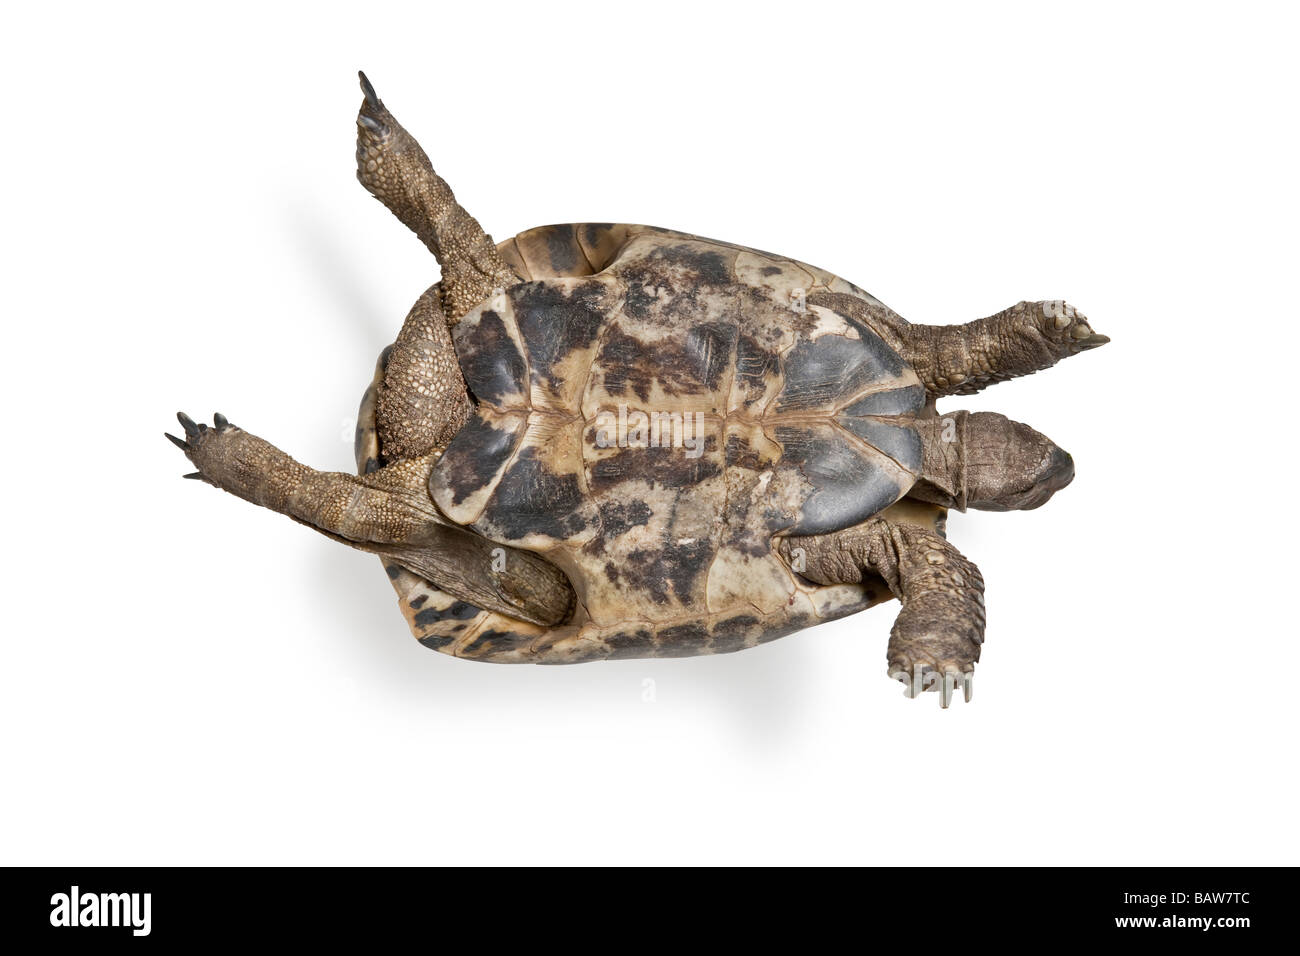 Turtle turned upside down Stock Photo